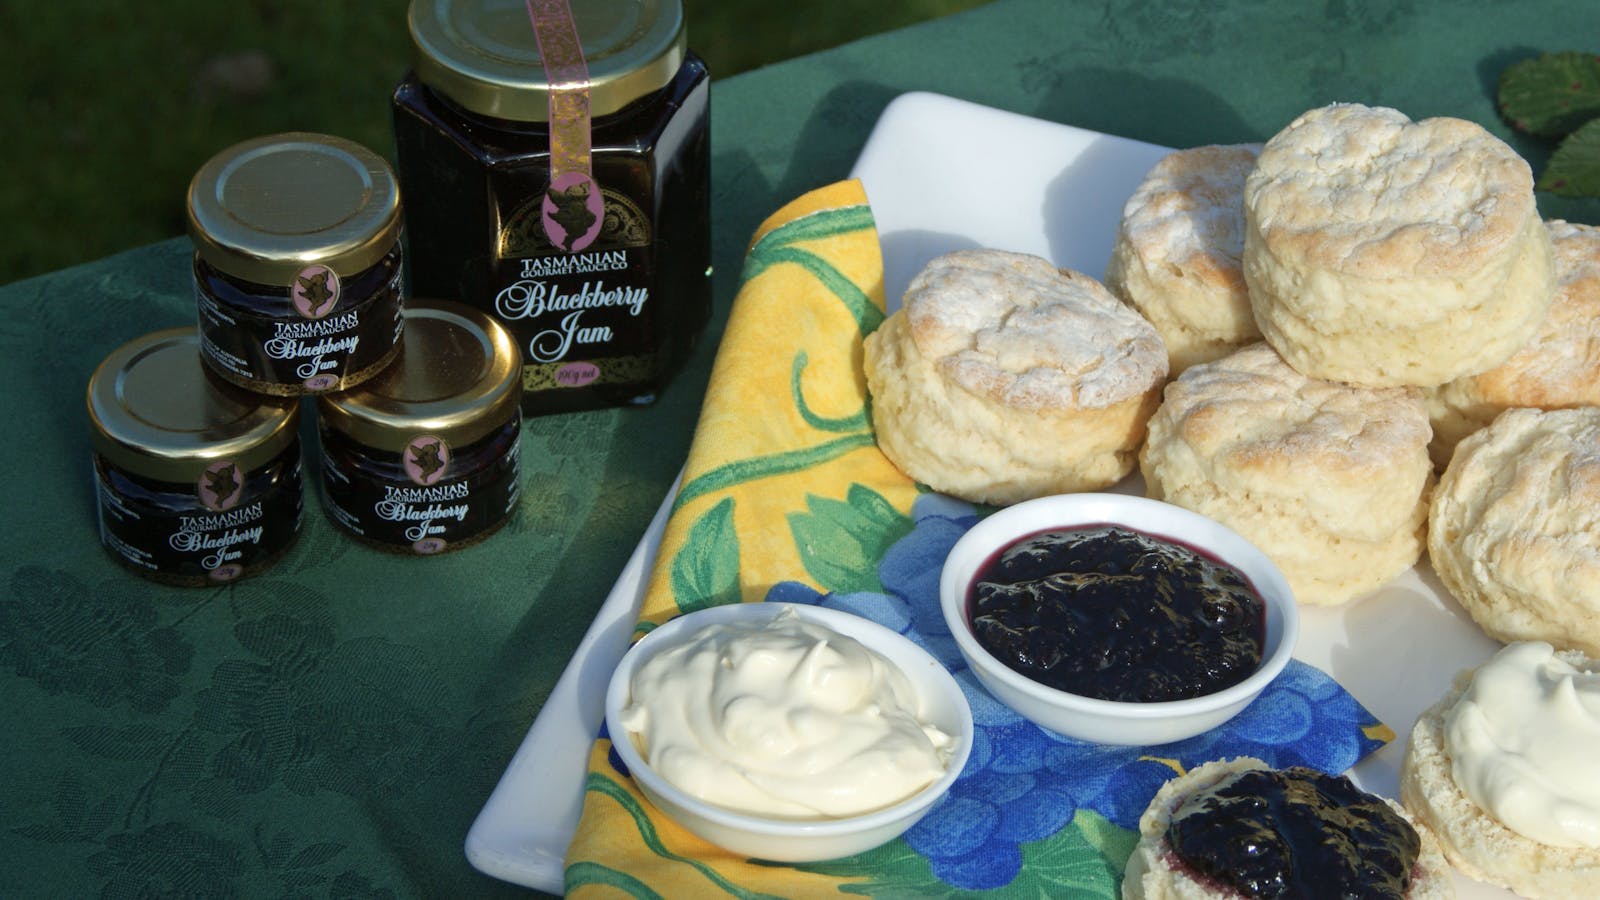 Group lunches and Devonshire Teas at the Tasmanian Gourmet Sauce Company